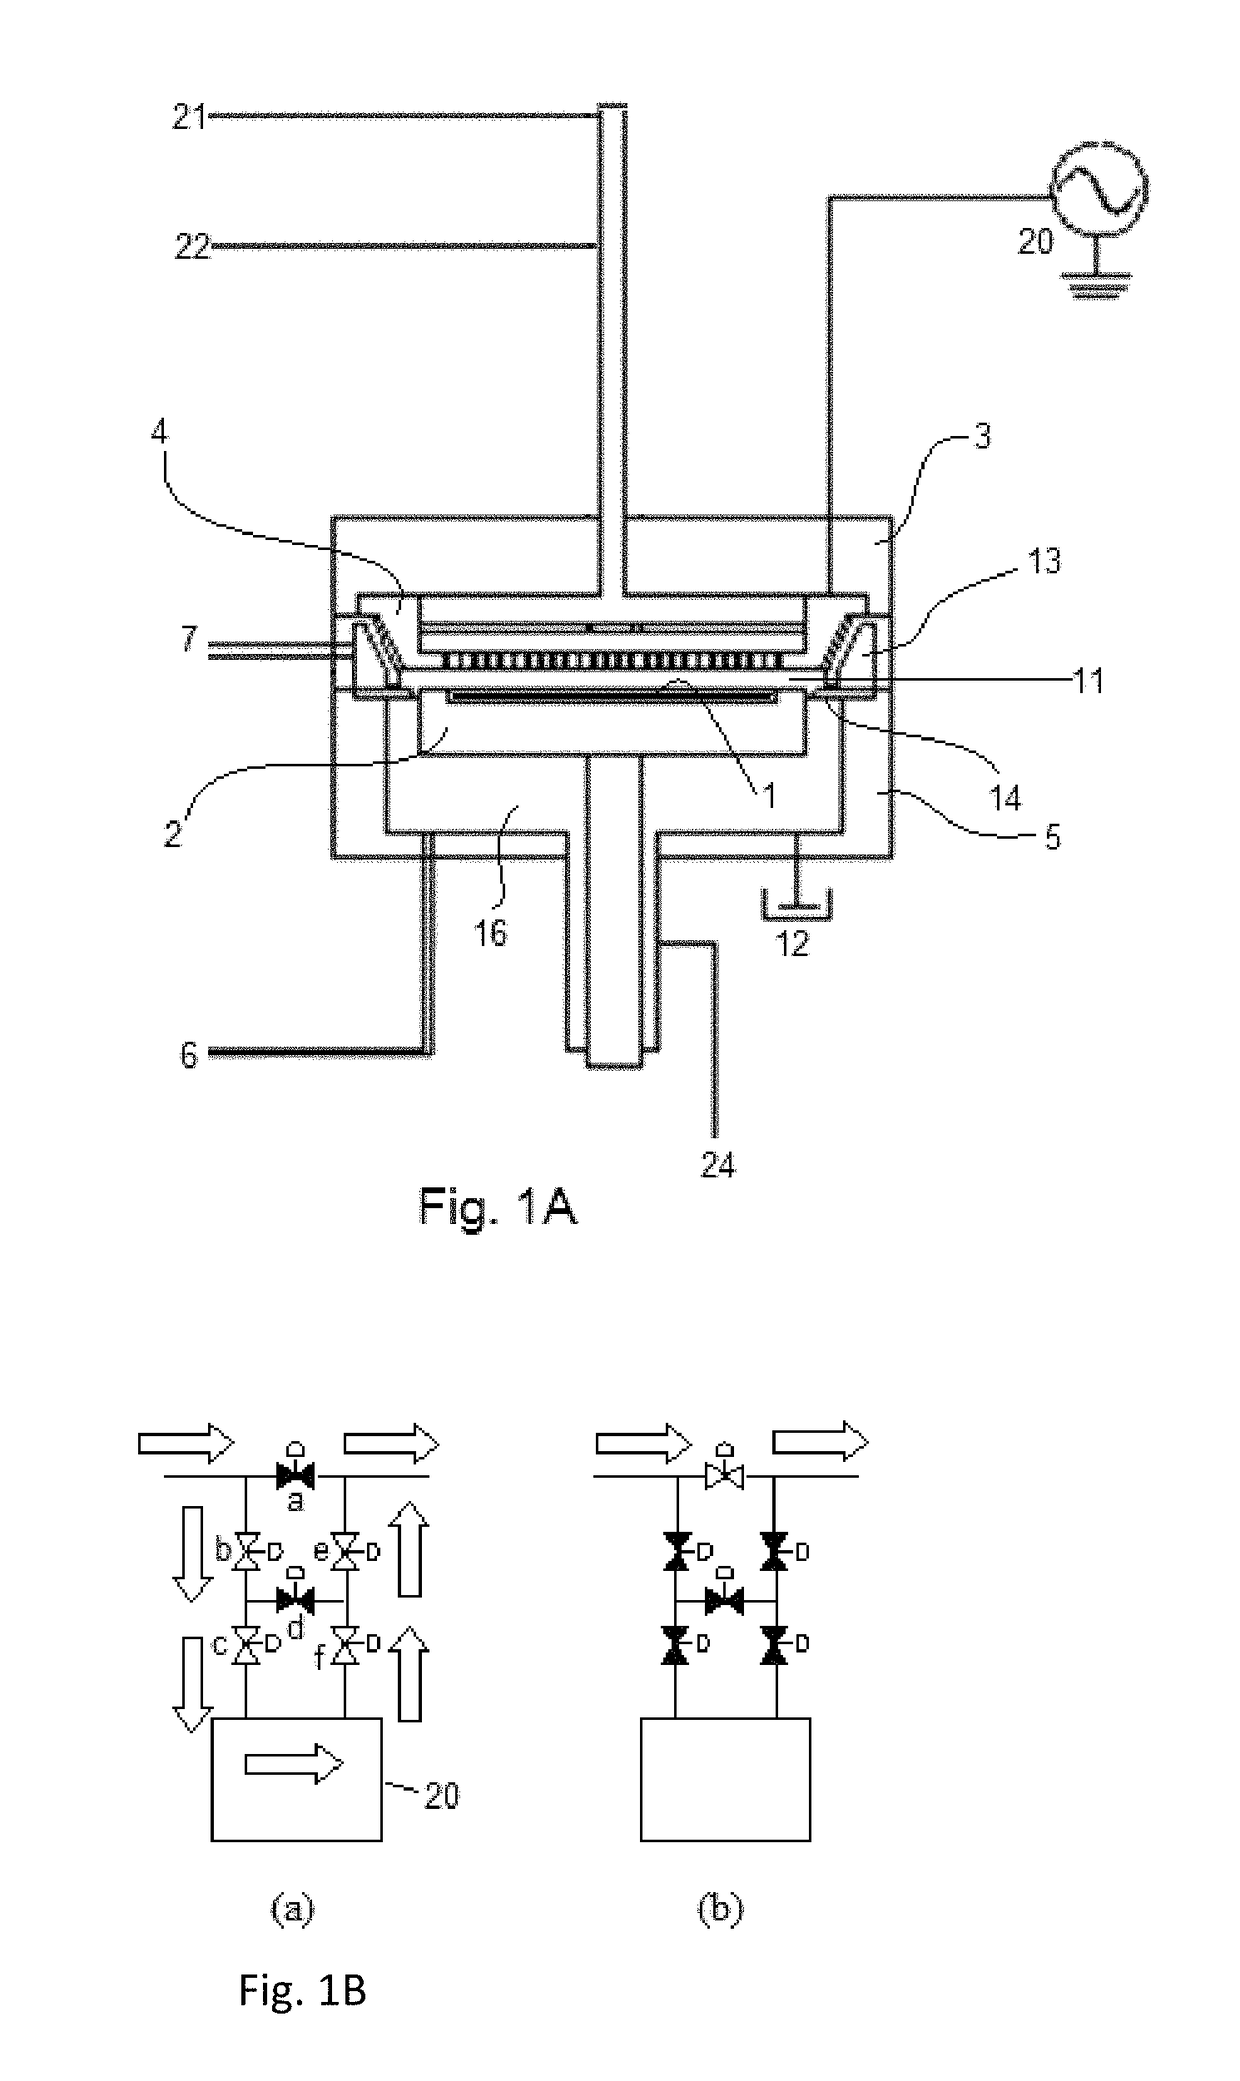 Method for depositing dielectric film in trenches by PEALD